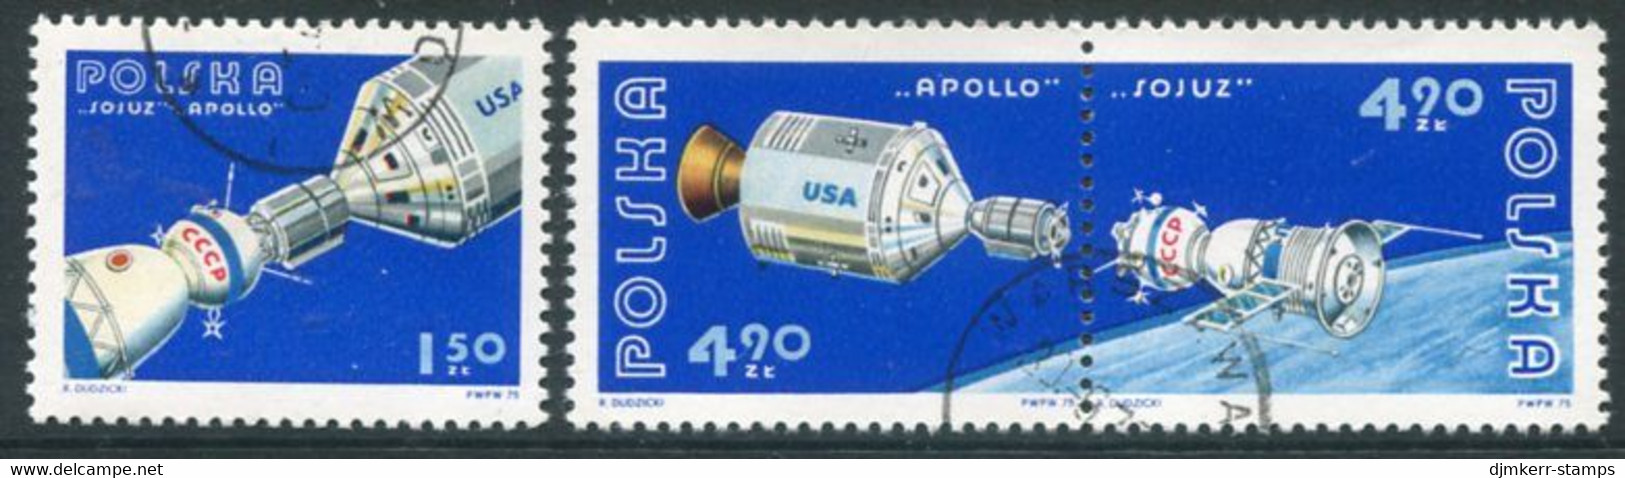 POLAND 1975 Apollo-Soyuz Mission Used. Michel 2386-88 - Used Stamps